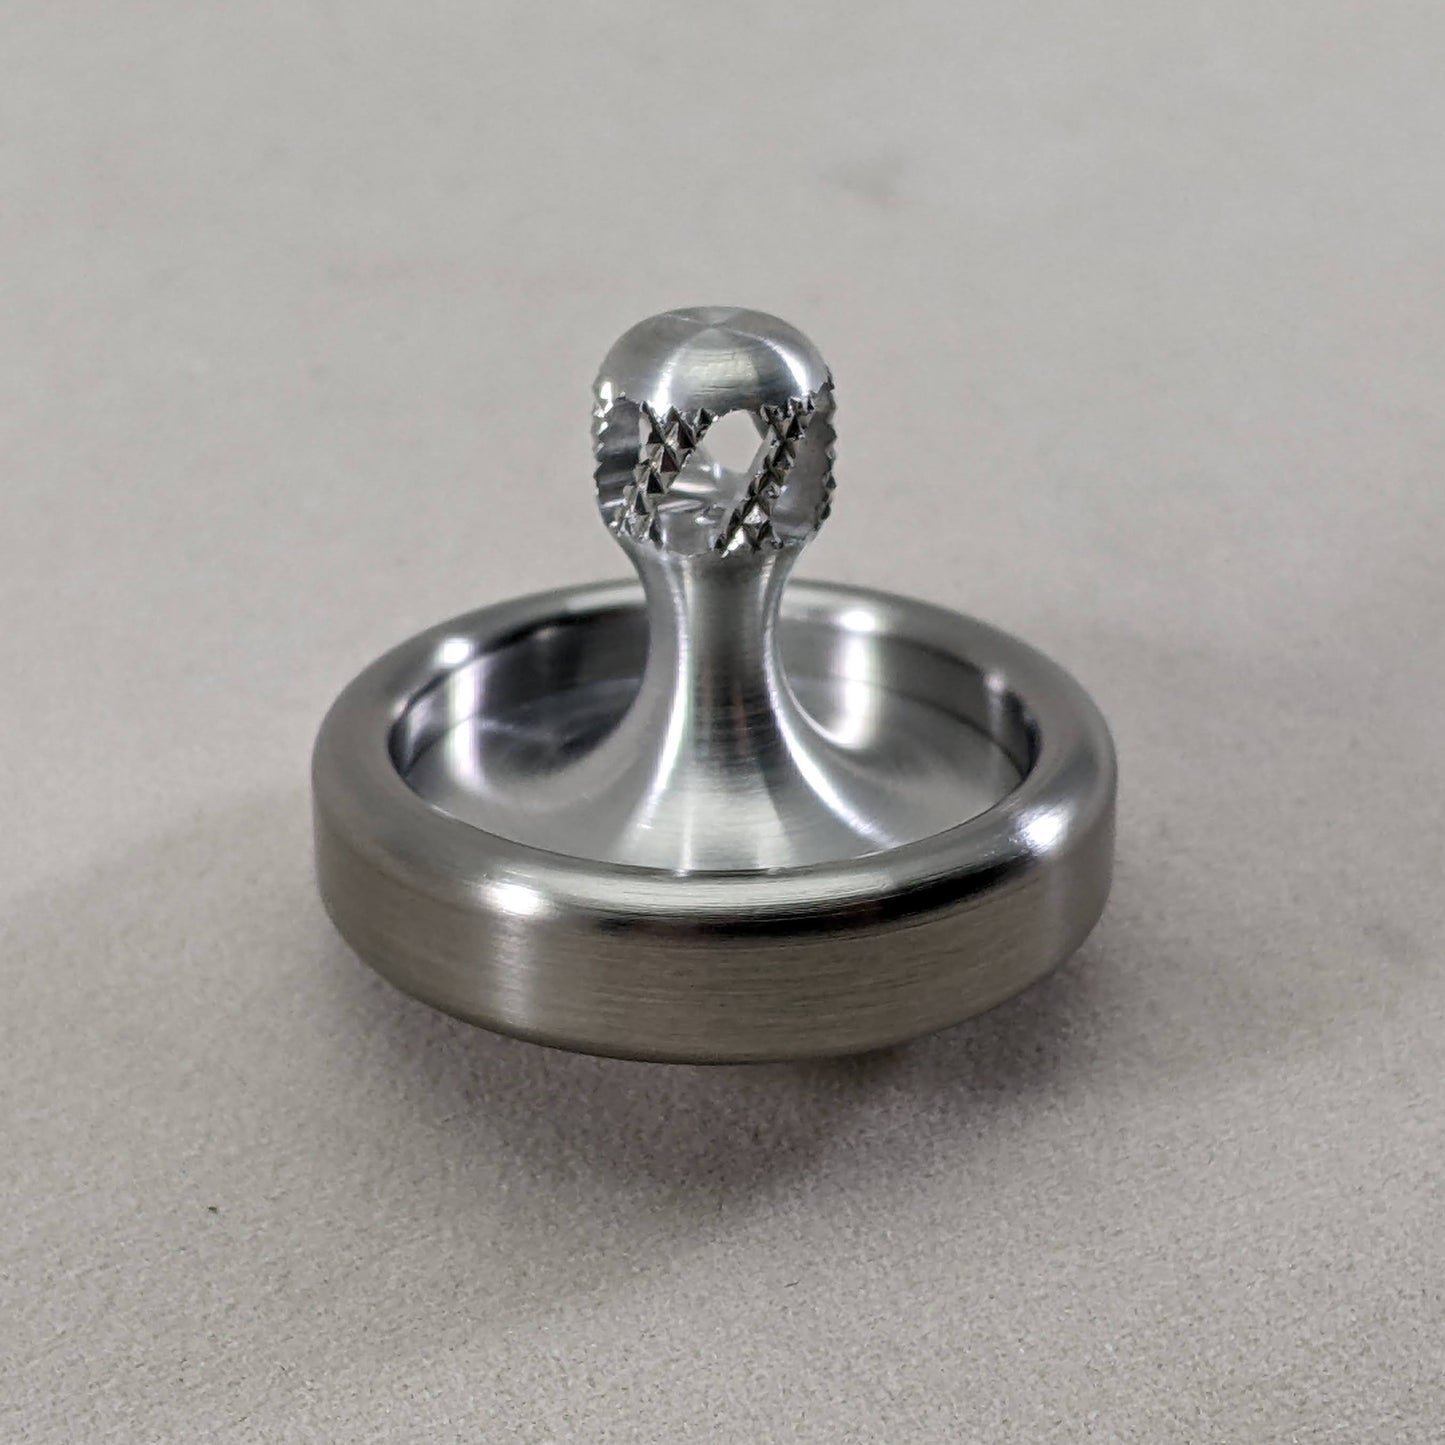 Dynamo - Tungsten and Aluminum Spin Top w/ Super Grip Spindle & Ruby Bearing